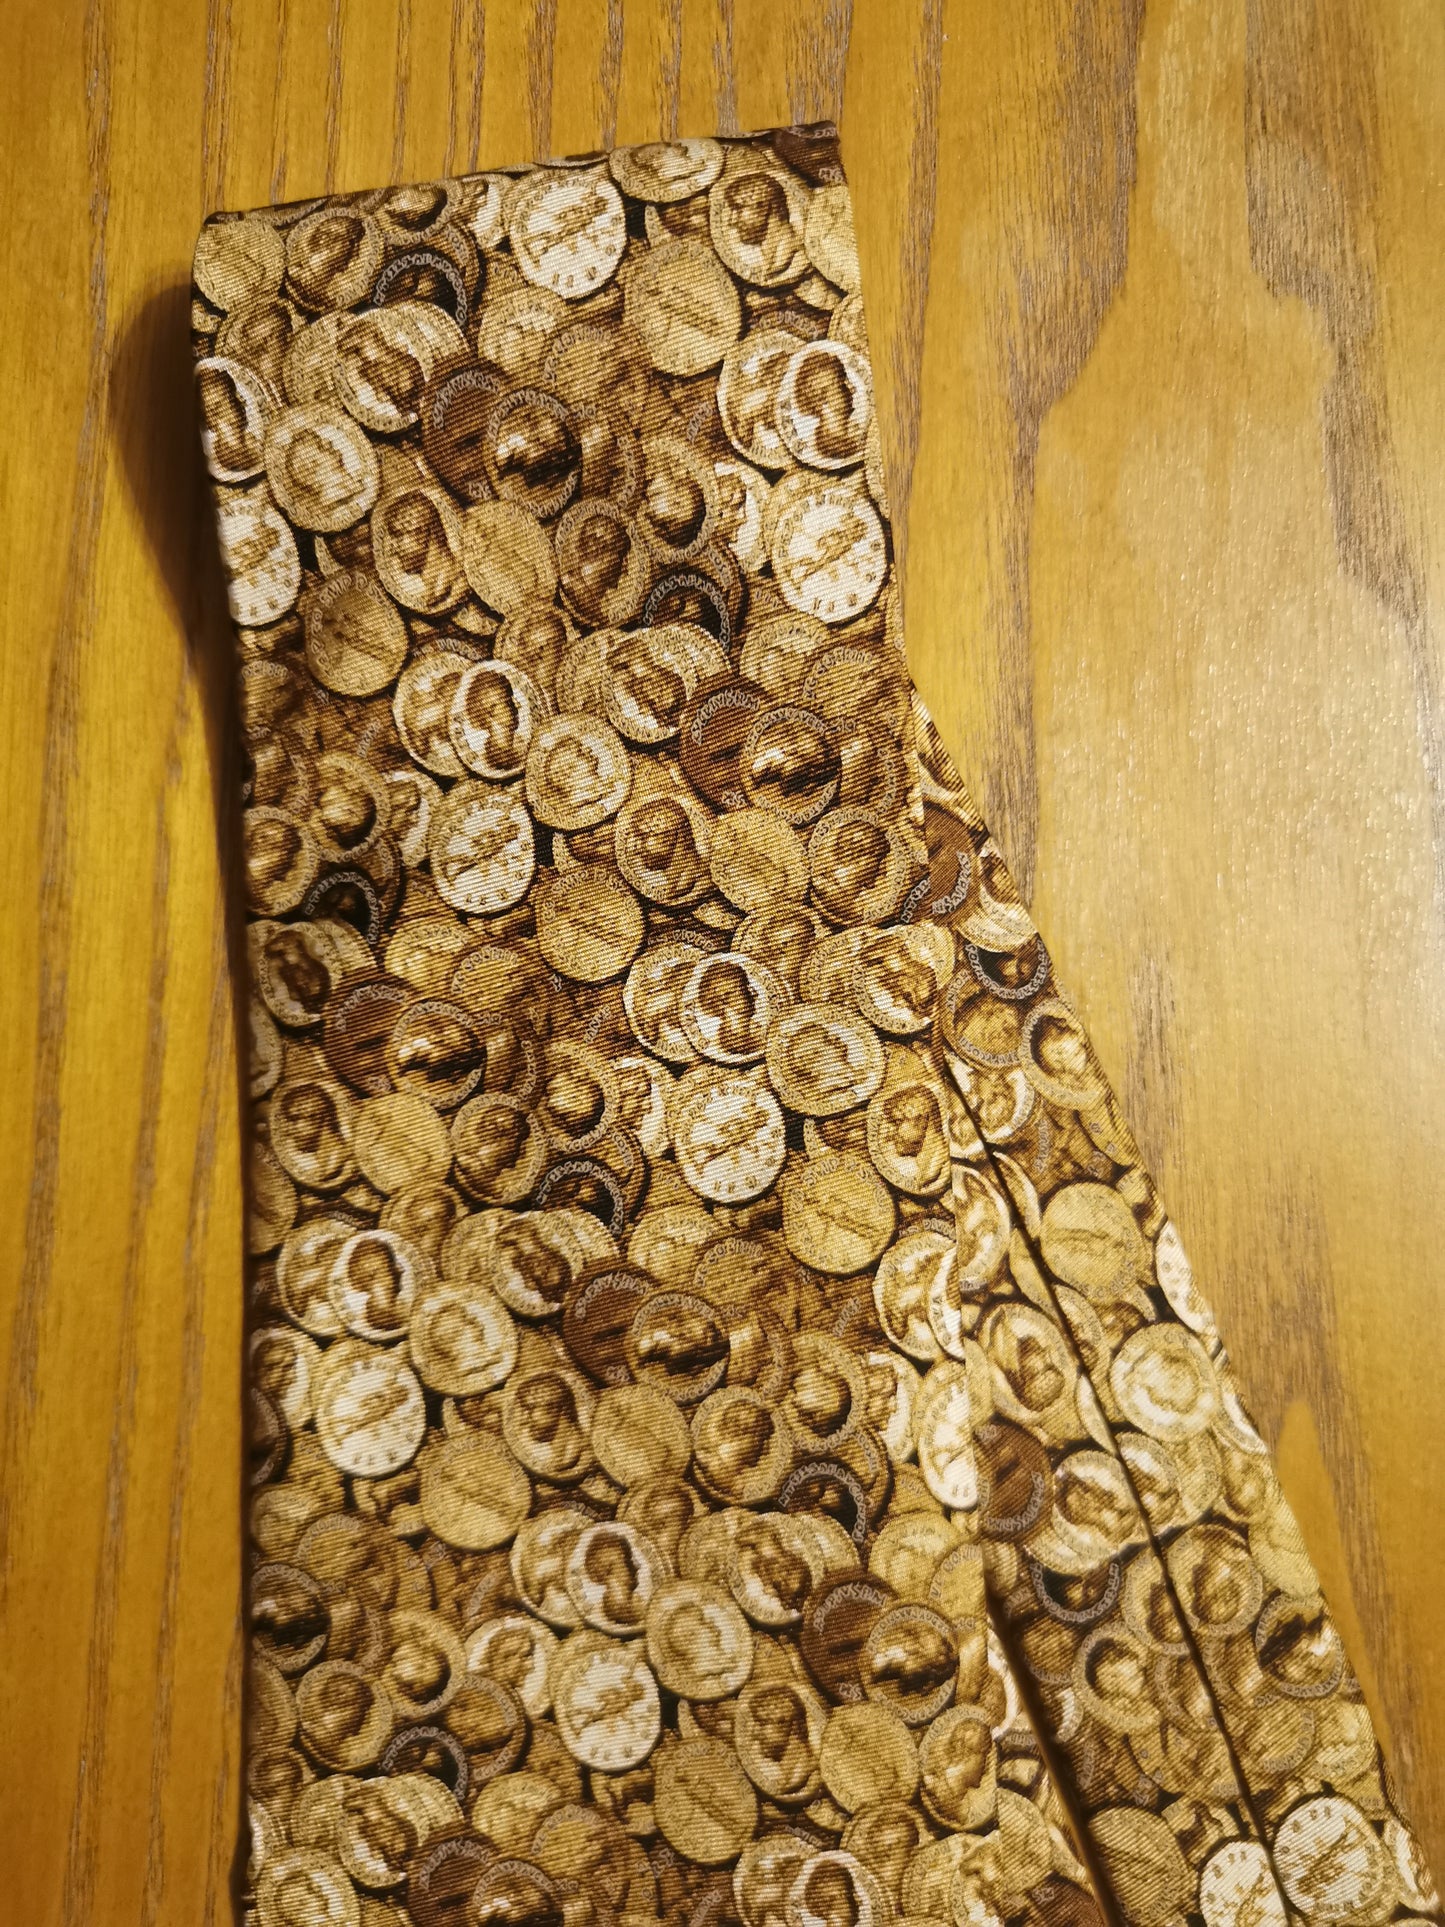 100% silk Fox & Chave Museum of London tie